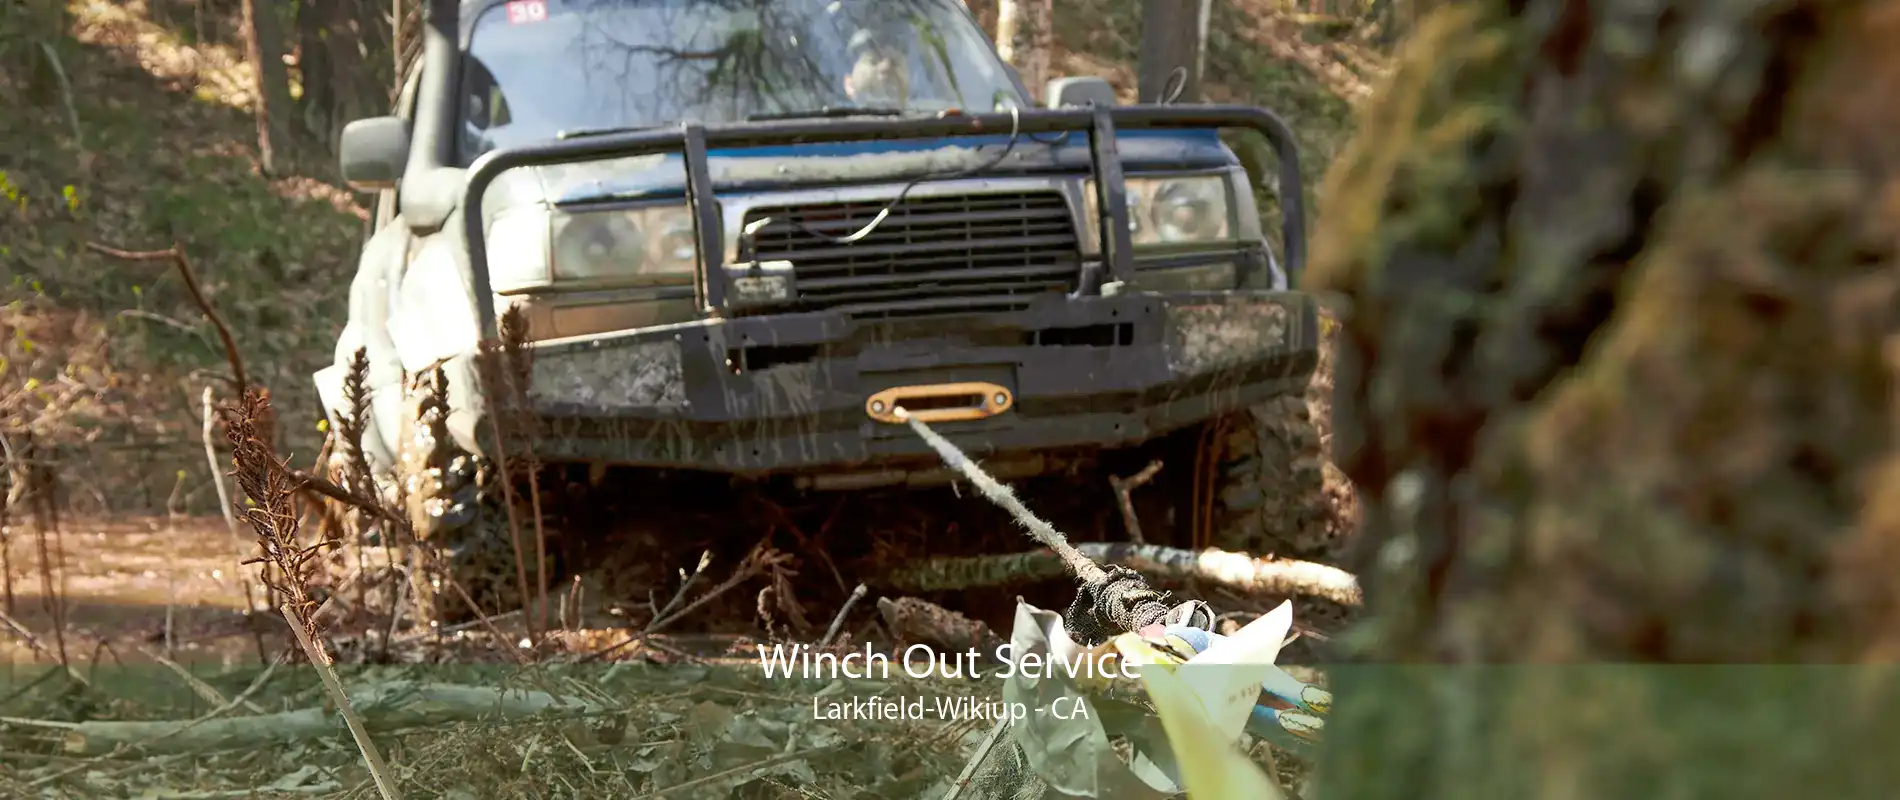 Winch Out Service Larkfield-Wikiup - CA